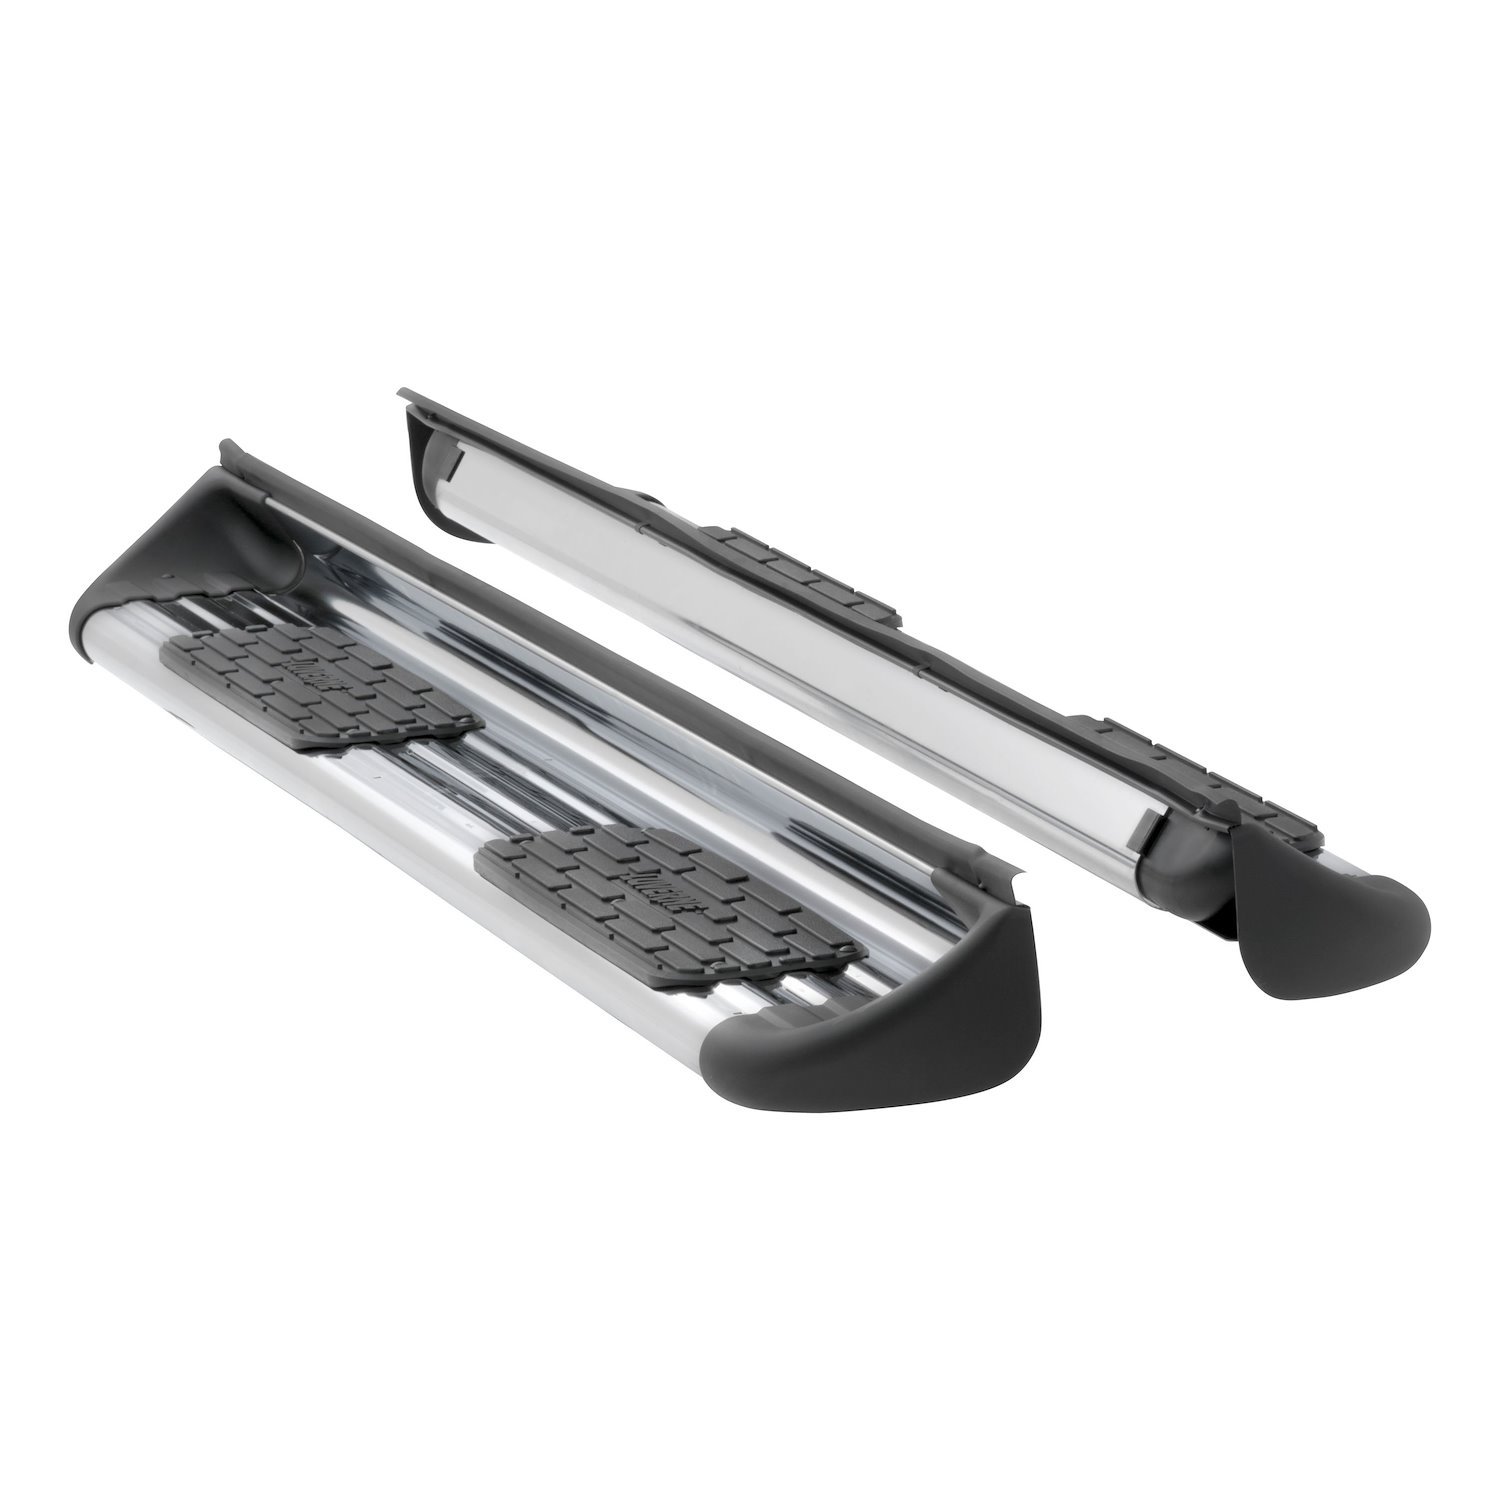 481033-571632 Polished Stainless Steel Side Entry Steps Fits Select Ram 1500 to 5500 Crew Cab